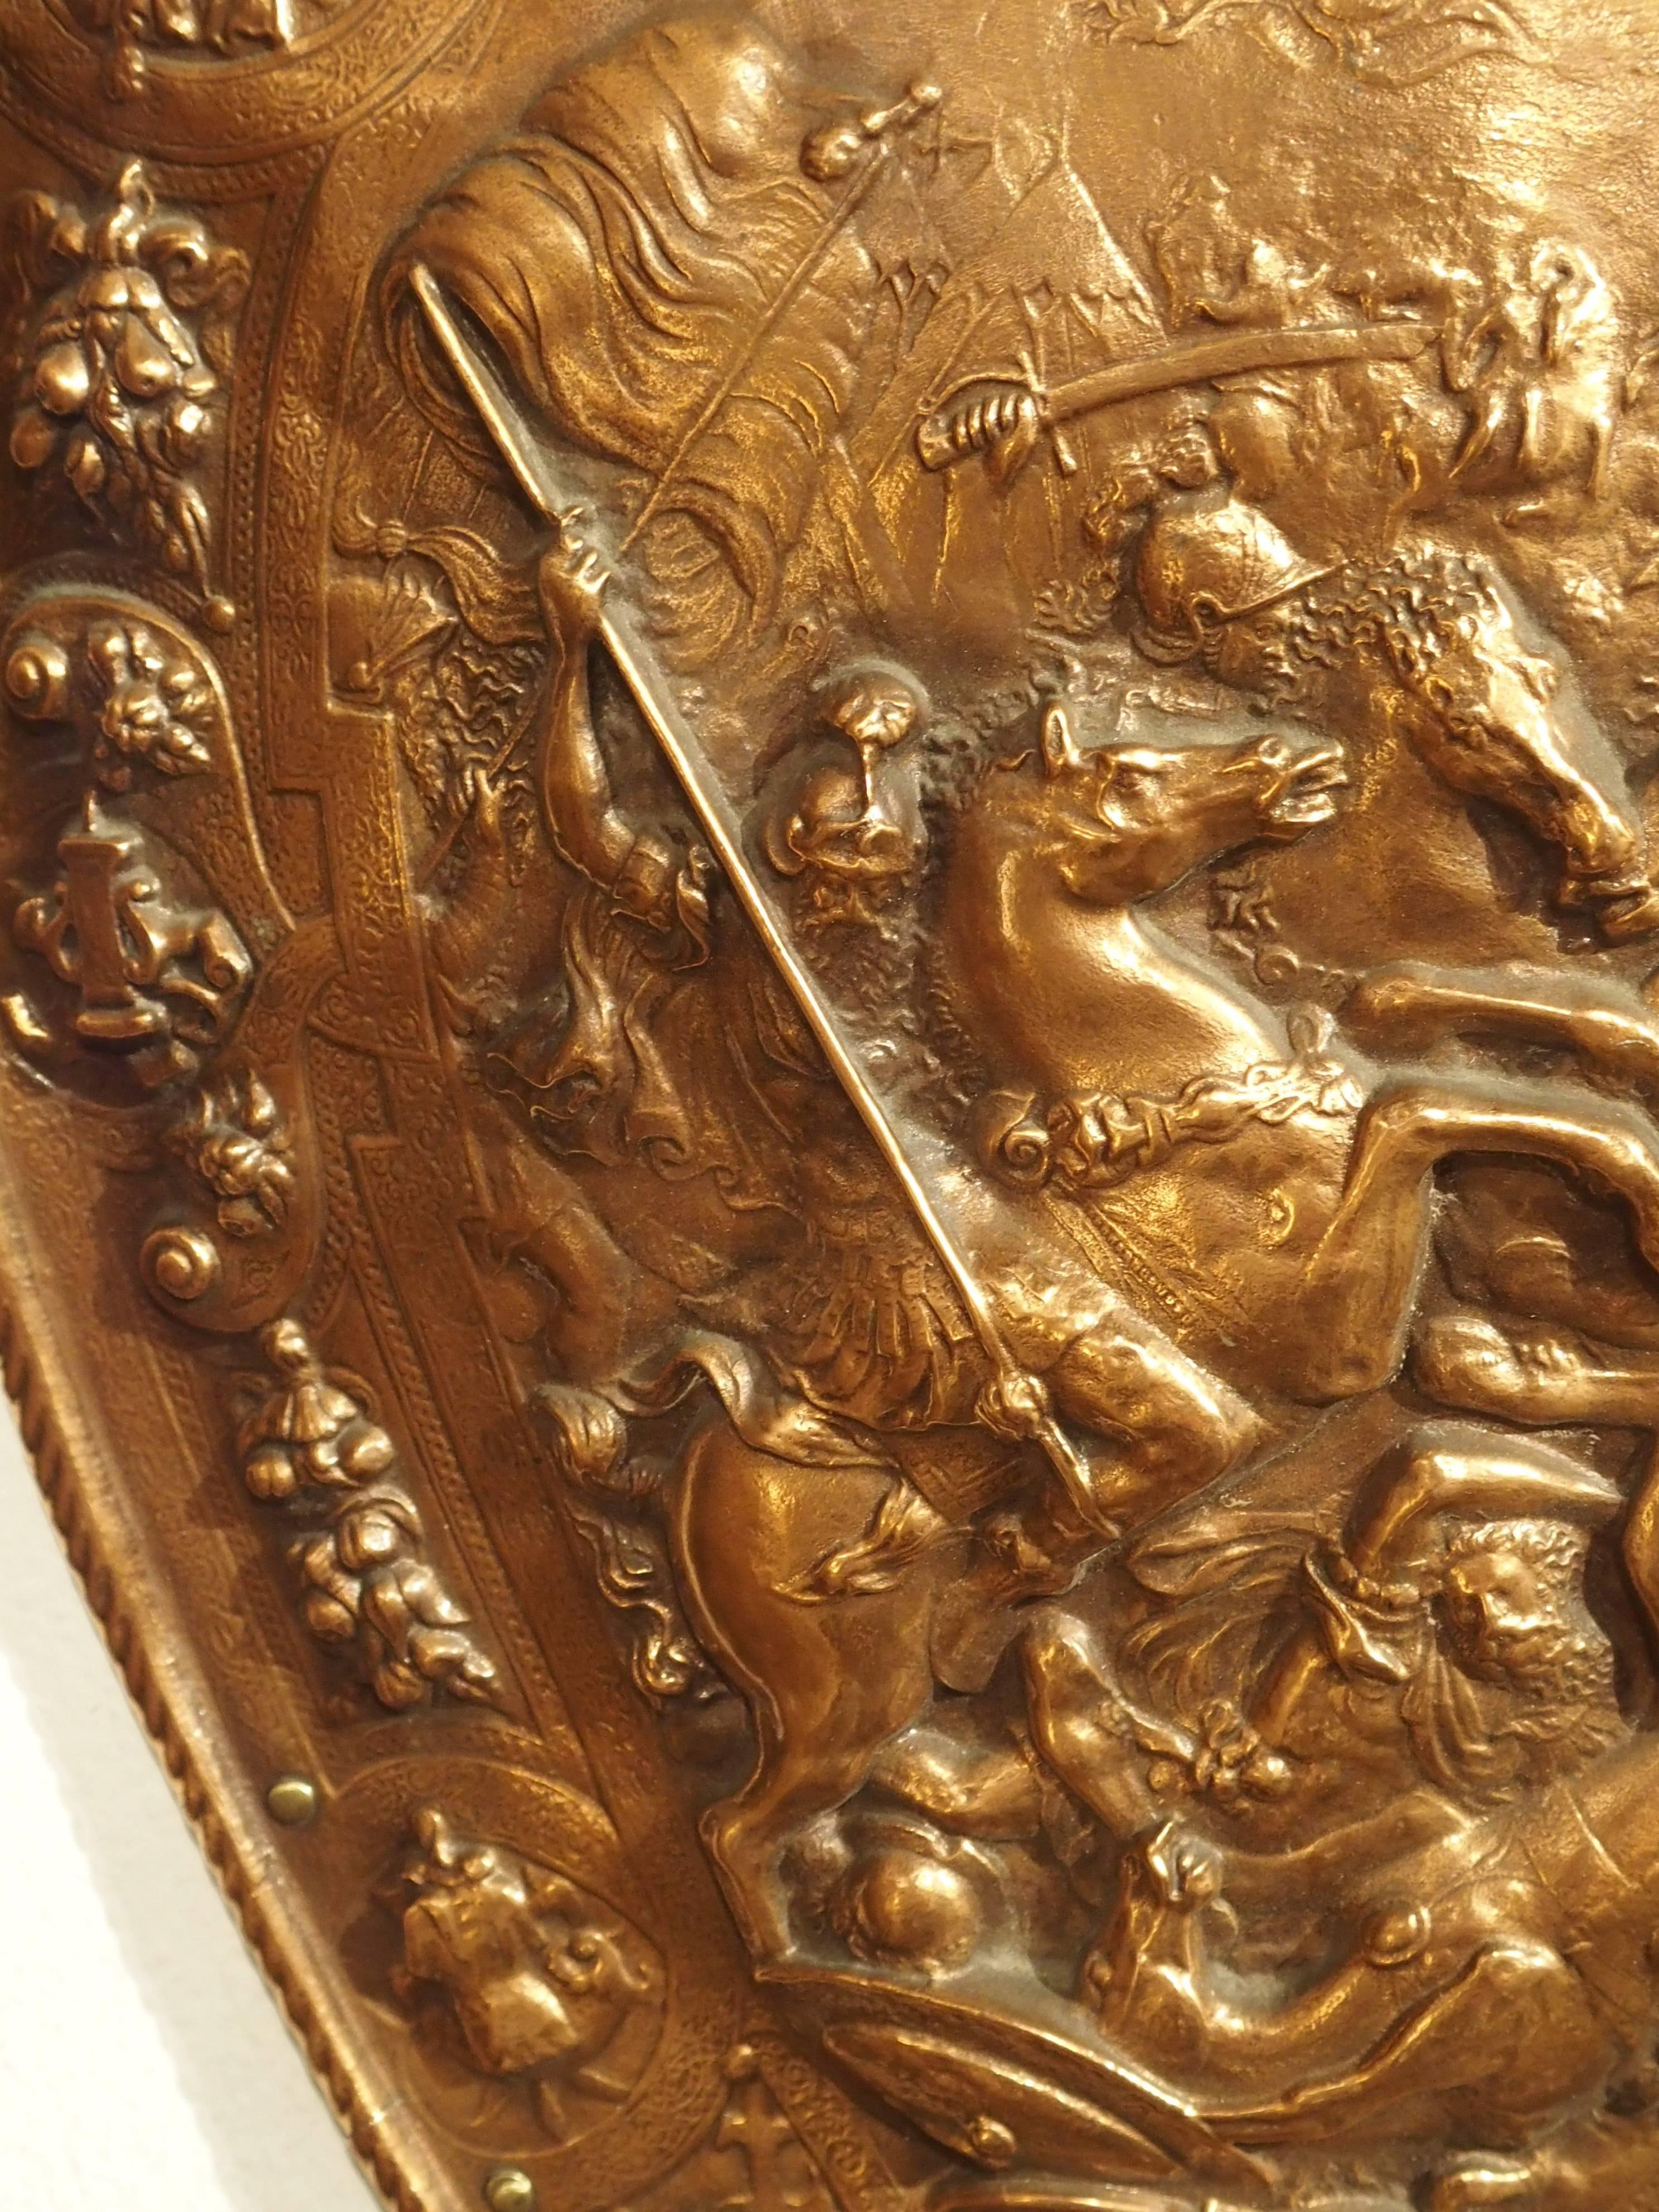 This stunning French copper parade shield is from the 1900s. The minute details in some areas are absolutely wonderful. The more you look at this shield, the more you begin to see other details. The scene depicts a Roman or Grecian battle scene at